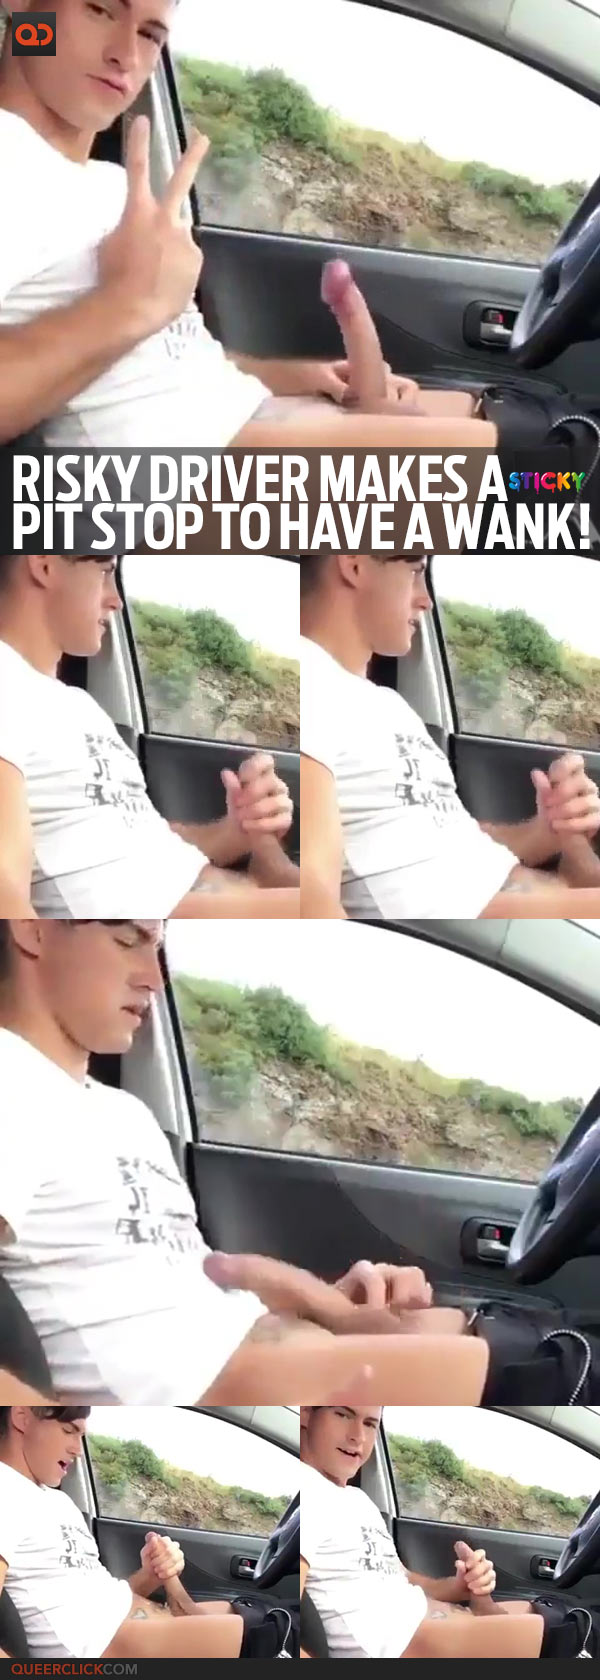 Risky Driver Makes A Pit Stop To Have A Wank!